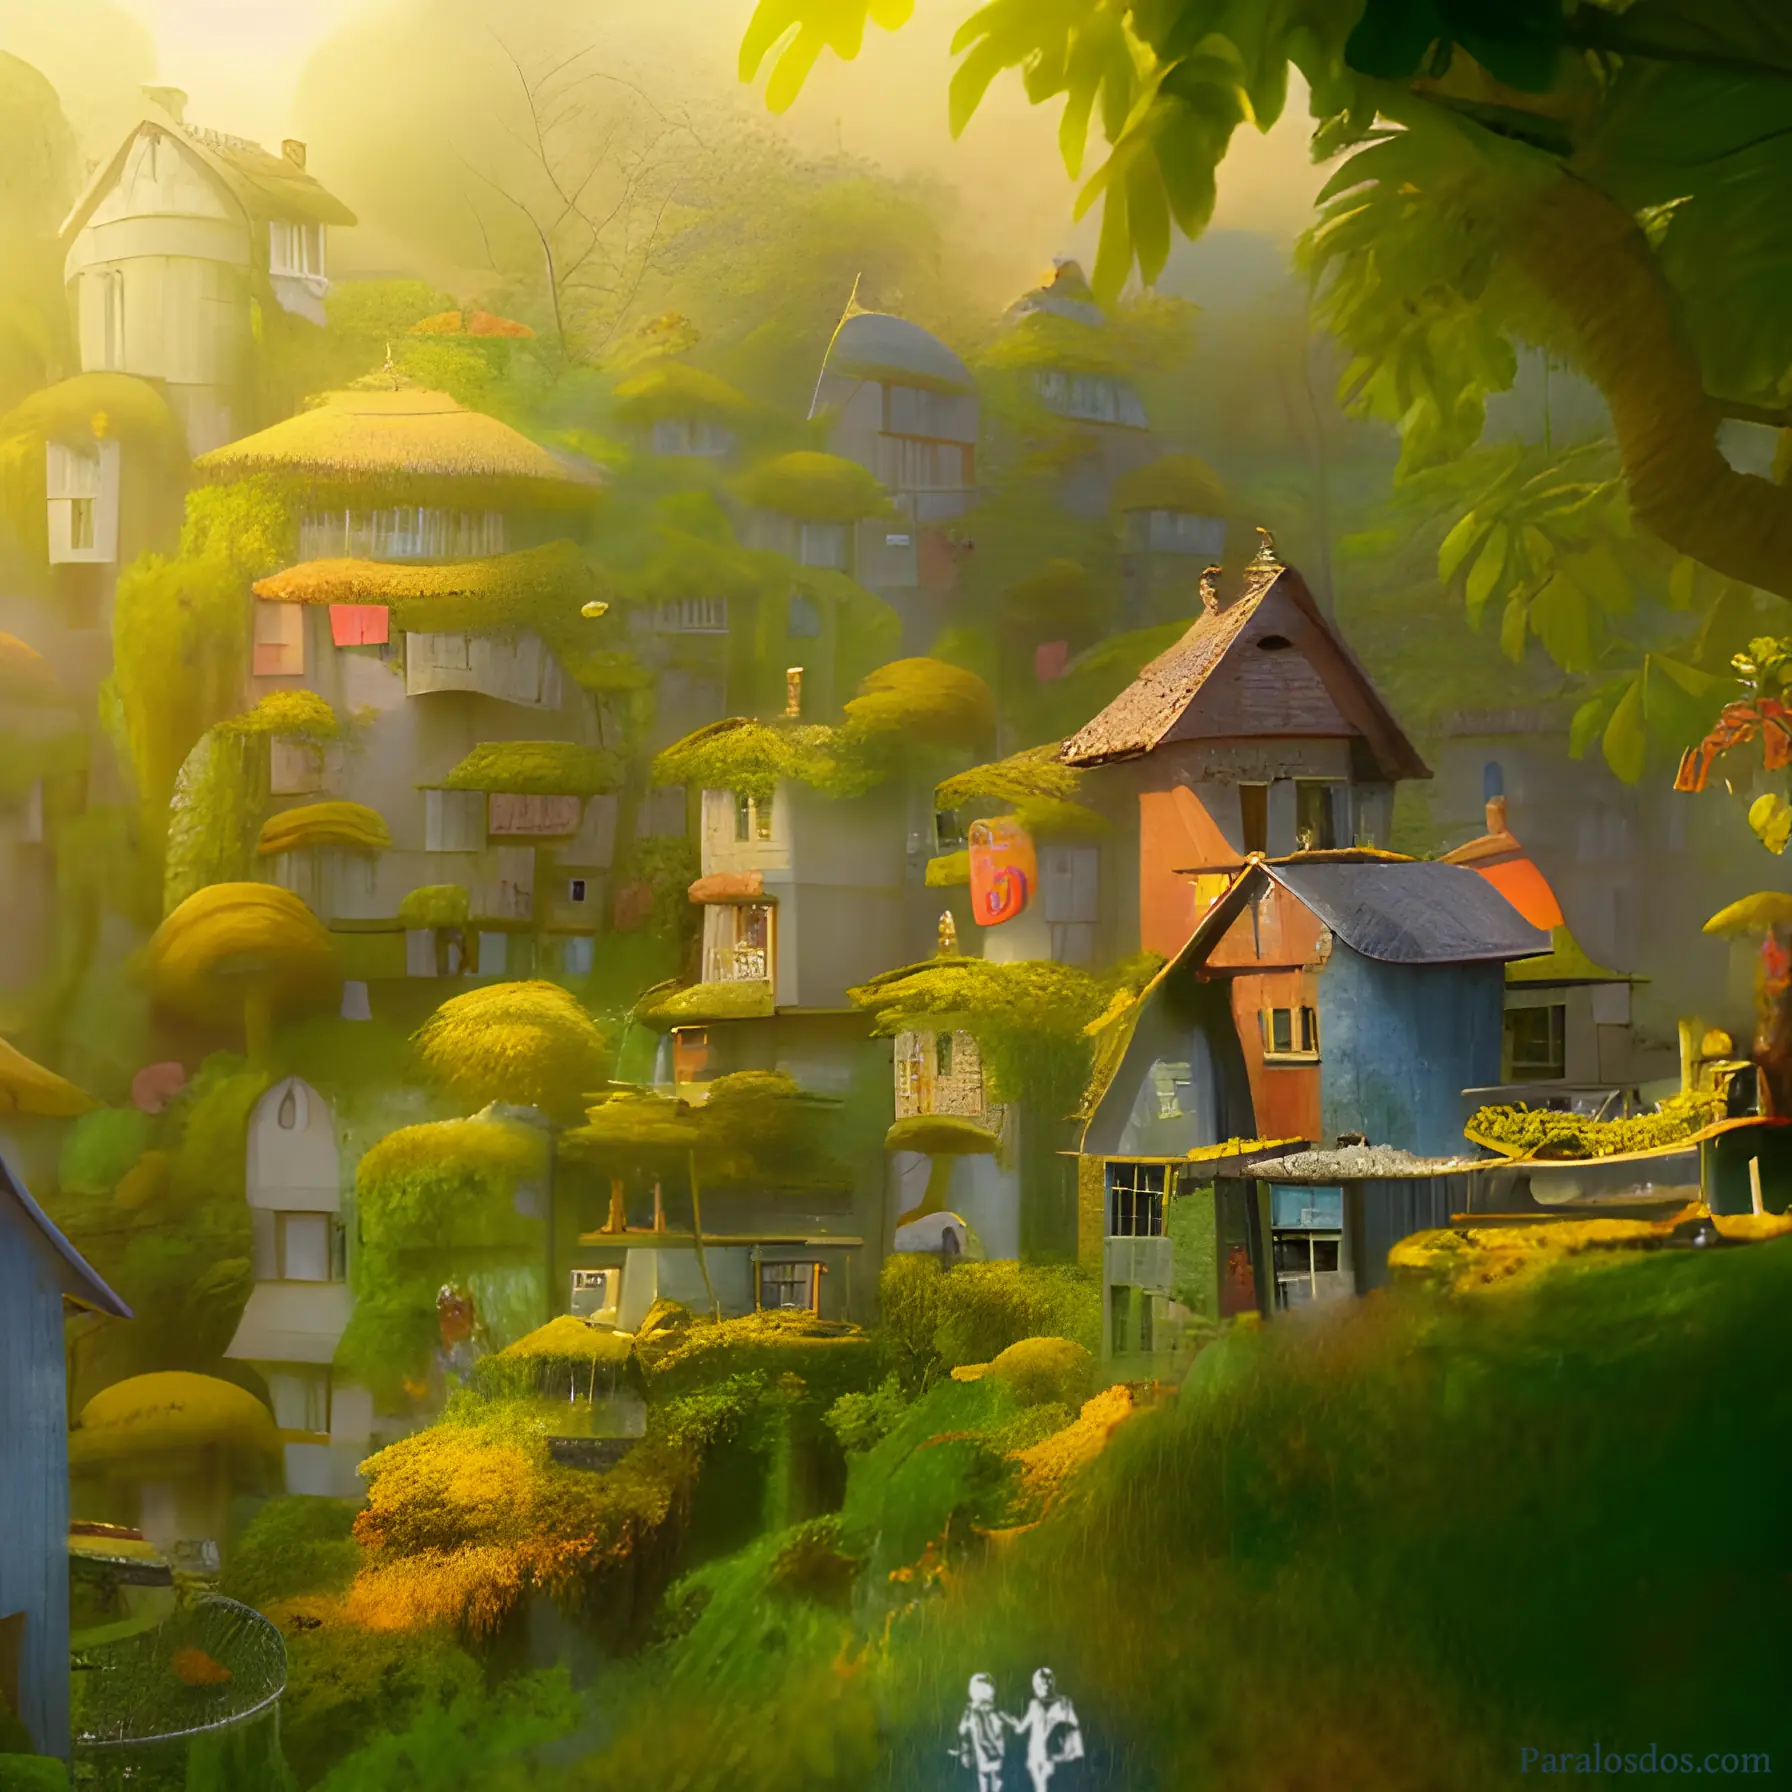 An artistic rendering of a beautiful village, nestled into forest and hills.